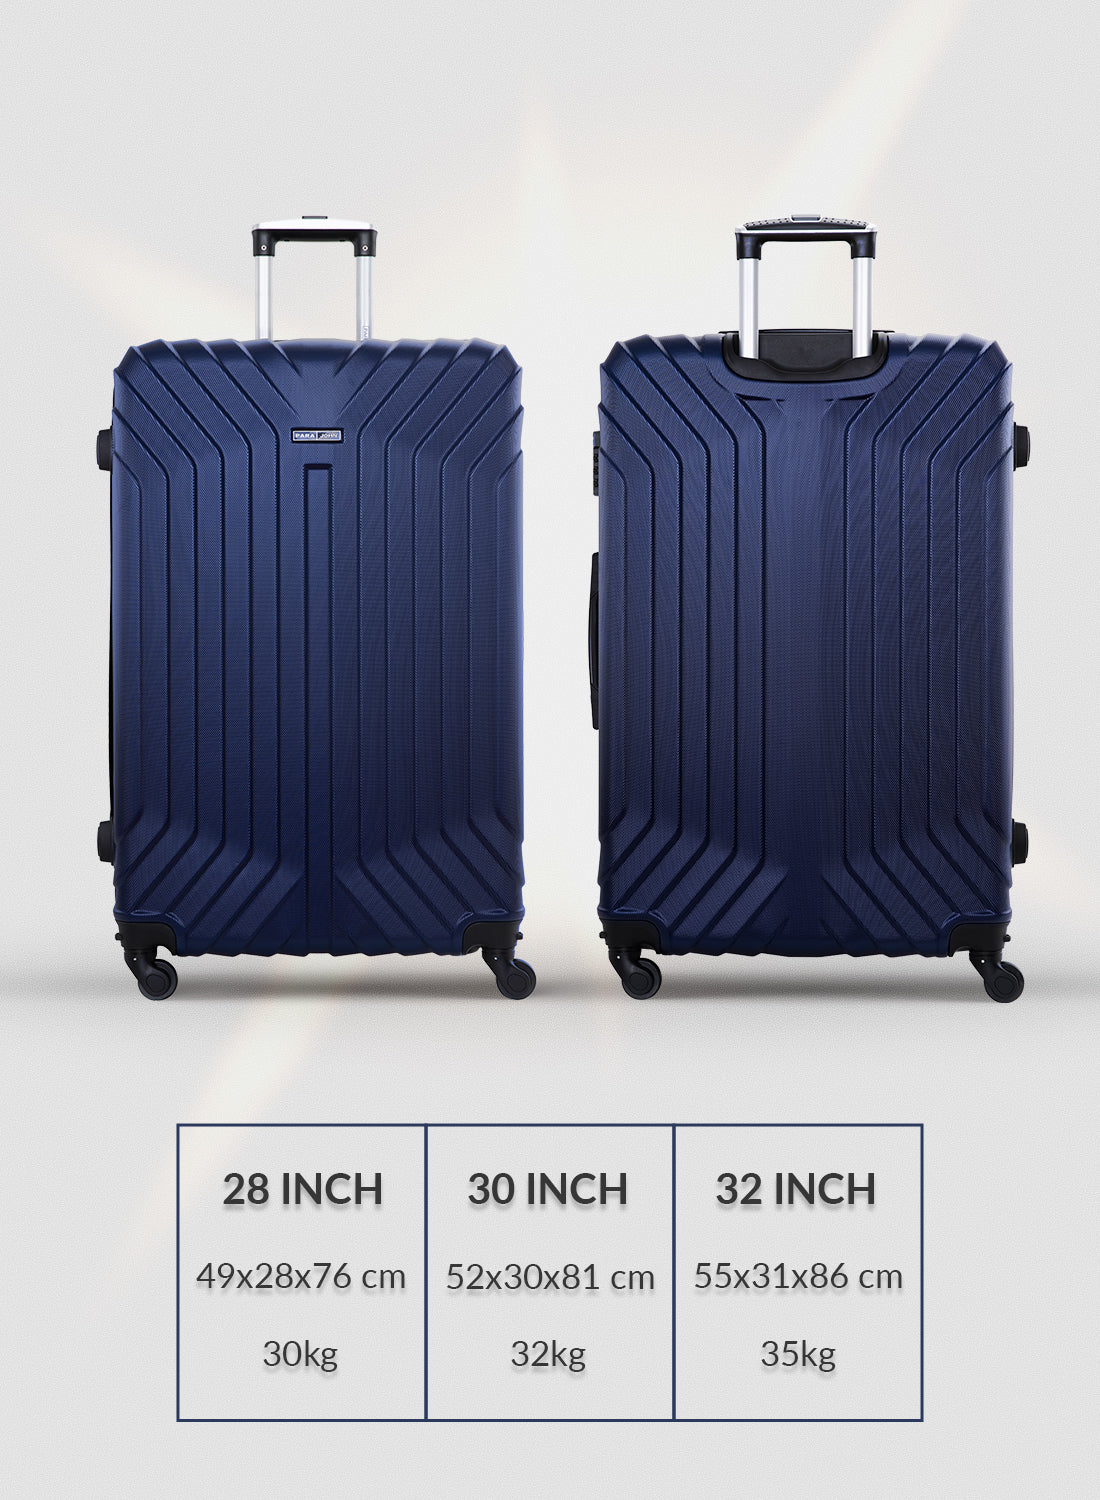 Parajohn Lightweight 3-Pieces Polypropylene Hard side Travel Luggage Trolley Bag Set with Lock for men / women / unisex Hard shell strong